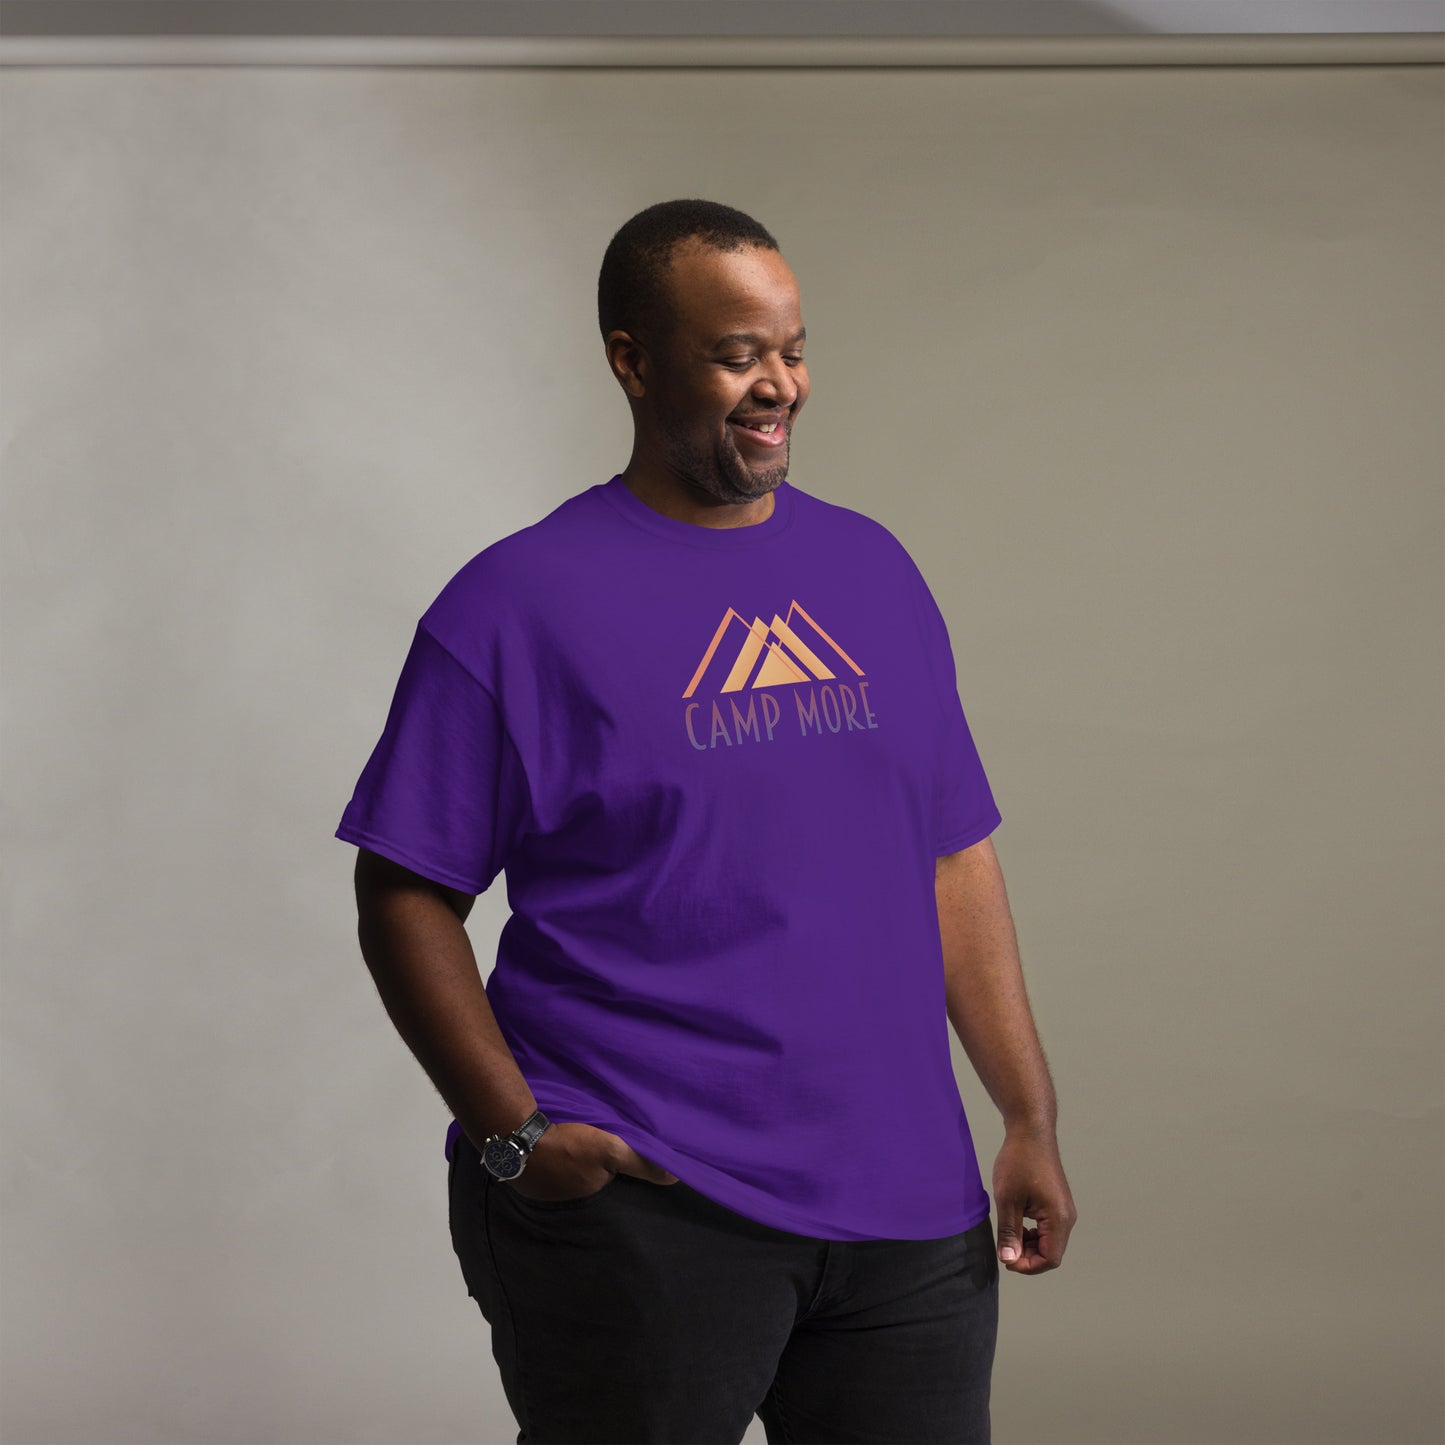 Cheerful man wearing a purple t-shirt with the orange 'CAMP MORE' slogan and abstract mountain design, complemented with black pants and a watch, standing in a room with a grey background and soft lighting